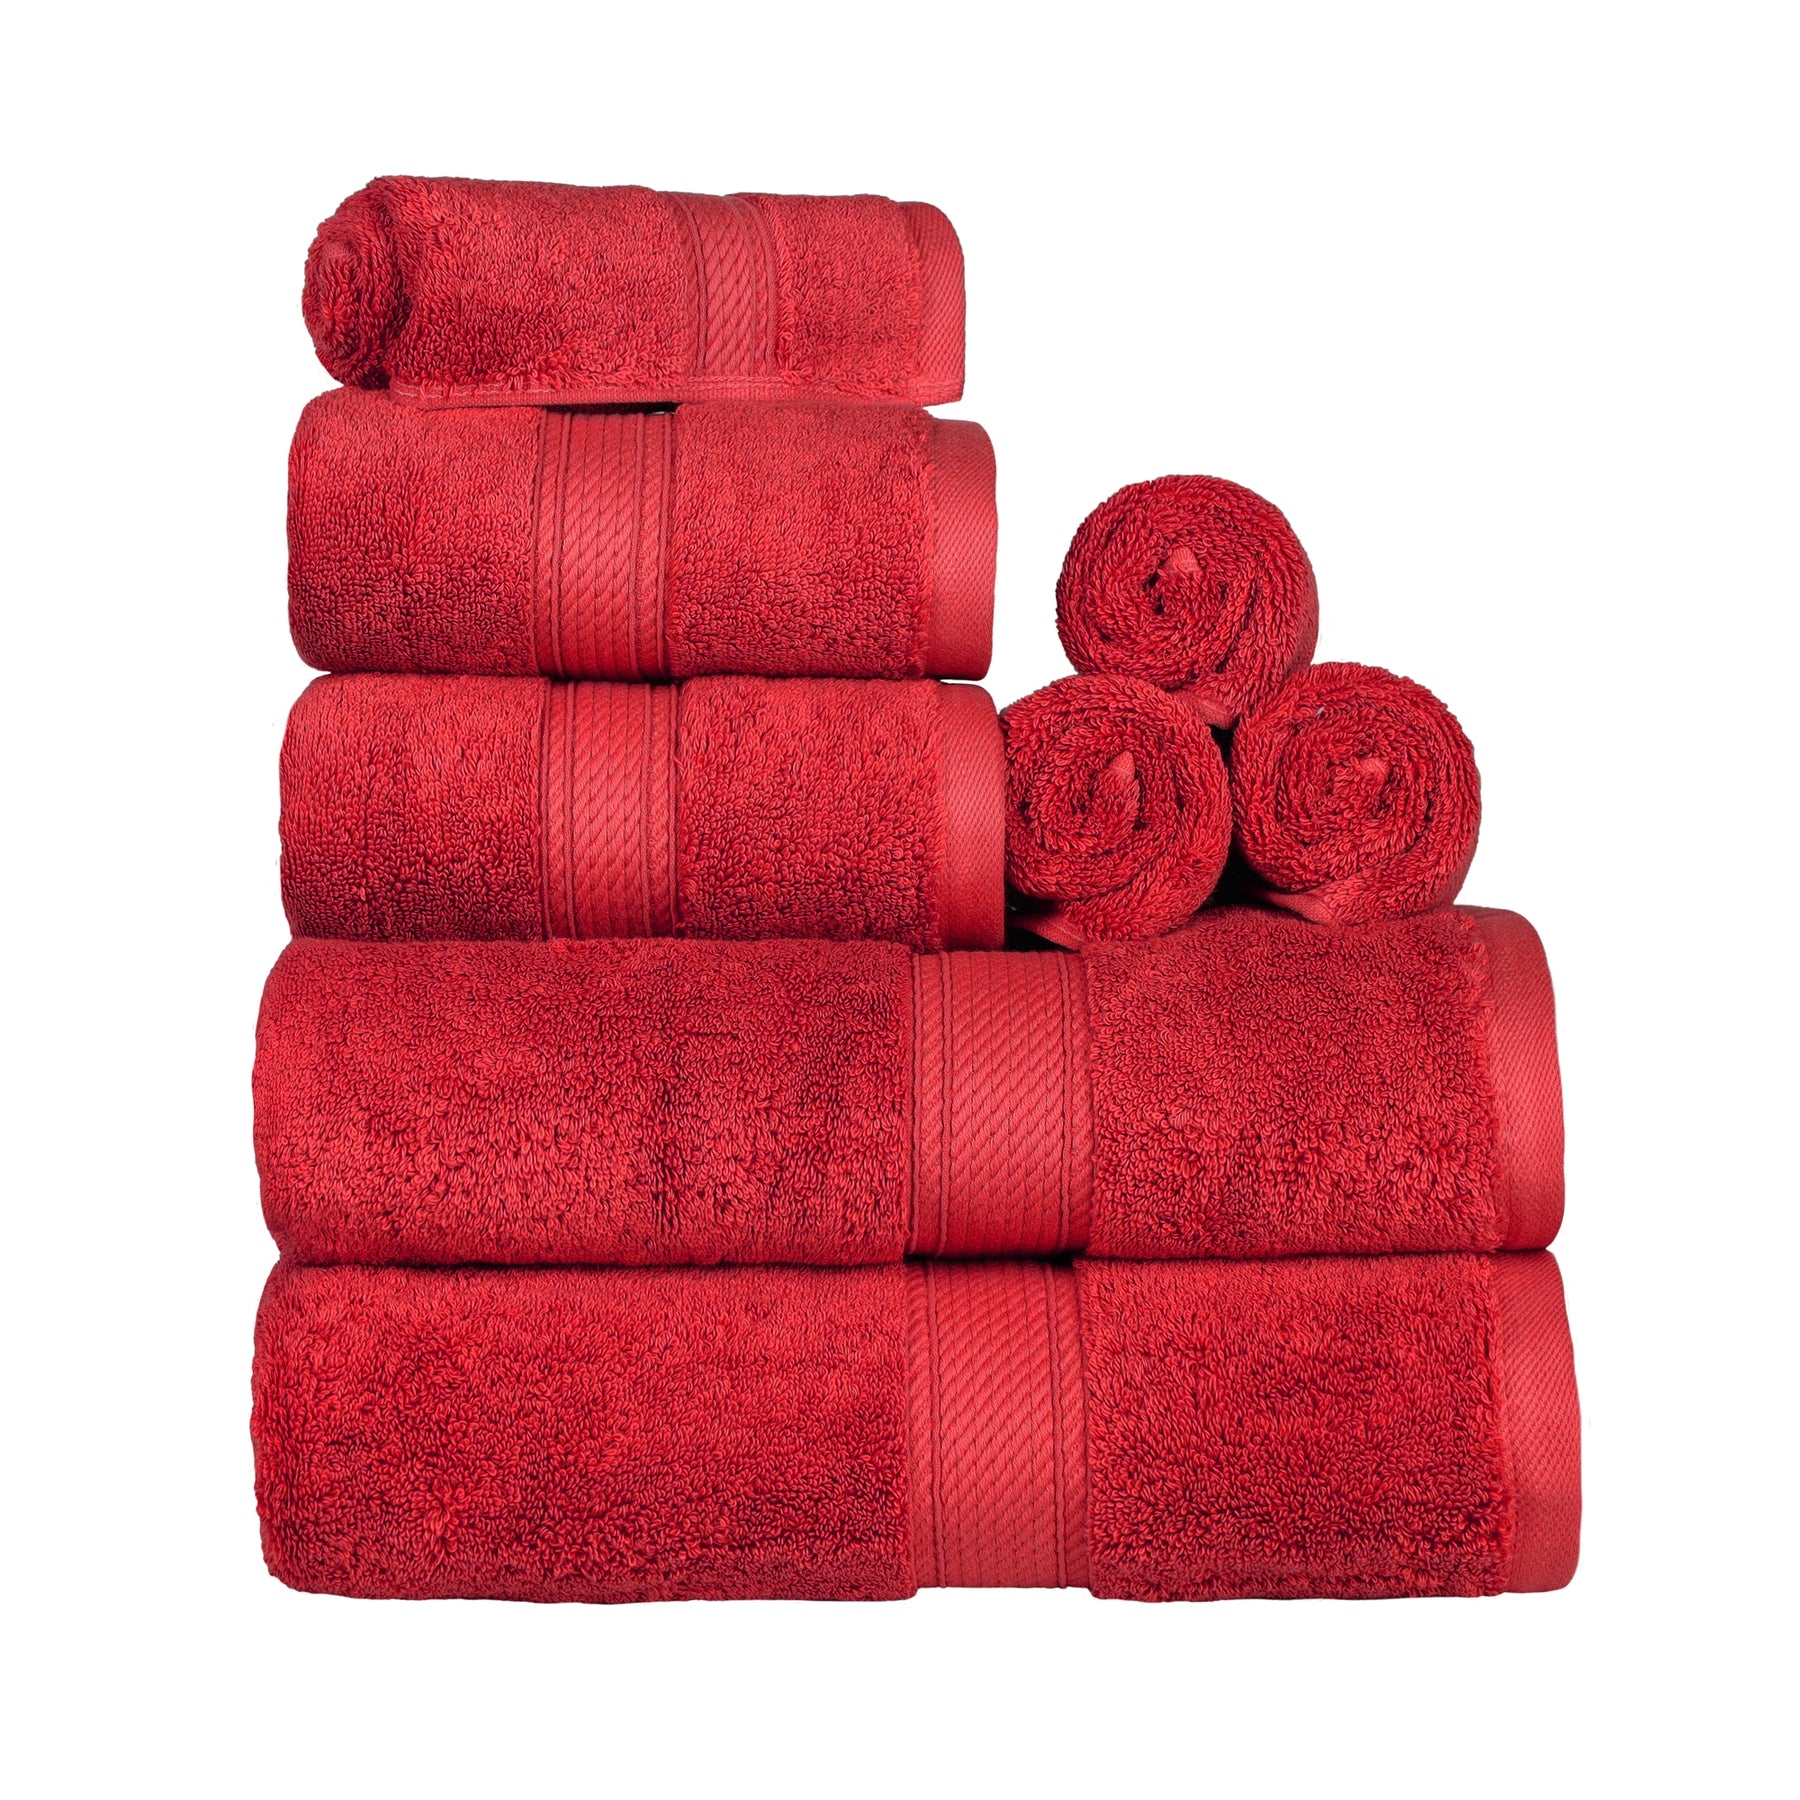  900 GSM 100% Egyptian Cotton 8-Piece Towel Set - Premium Hotel  Quality Towel Sets - Heavy Weight & Absorbent - 4 Bath Towels 30 x 55, 2  Hand Towels 20 x